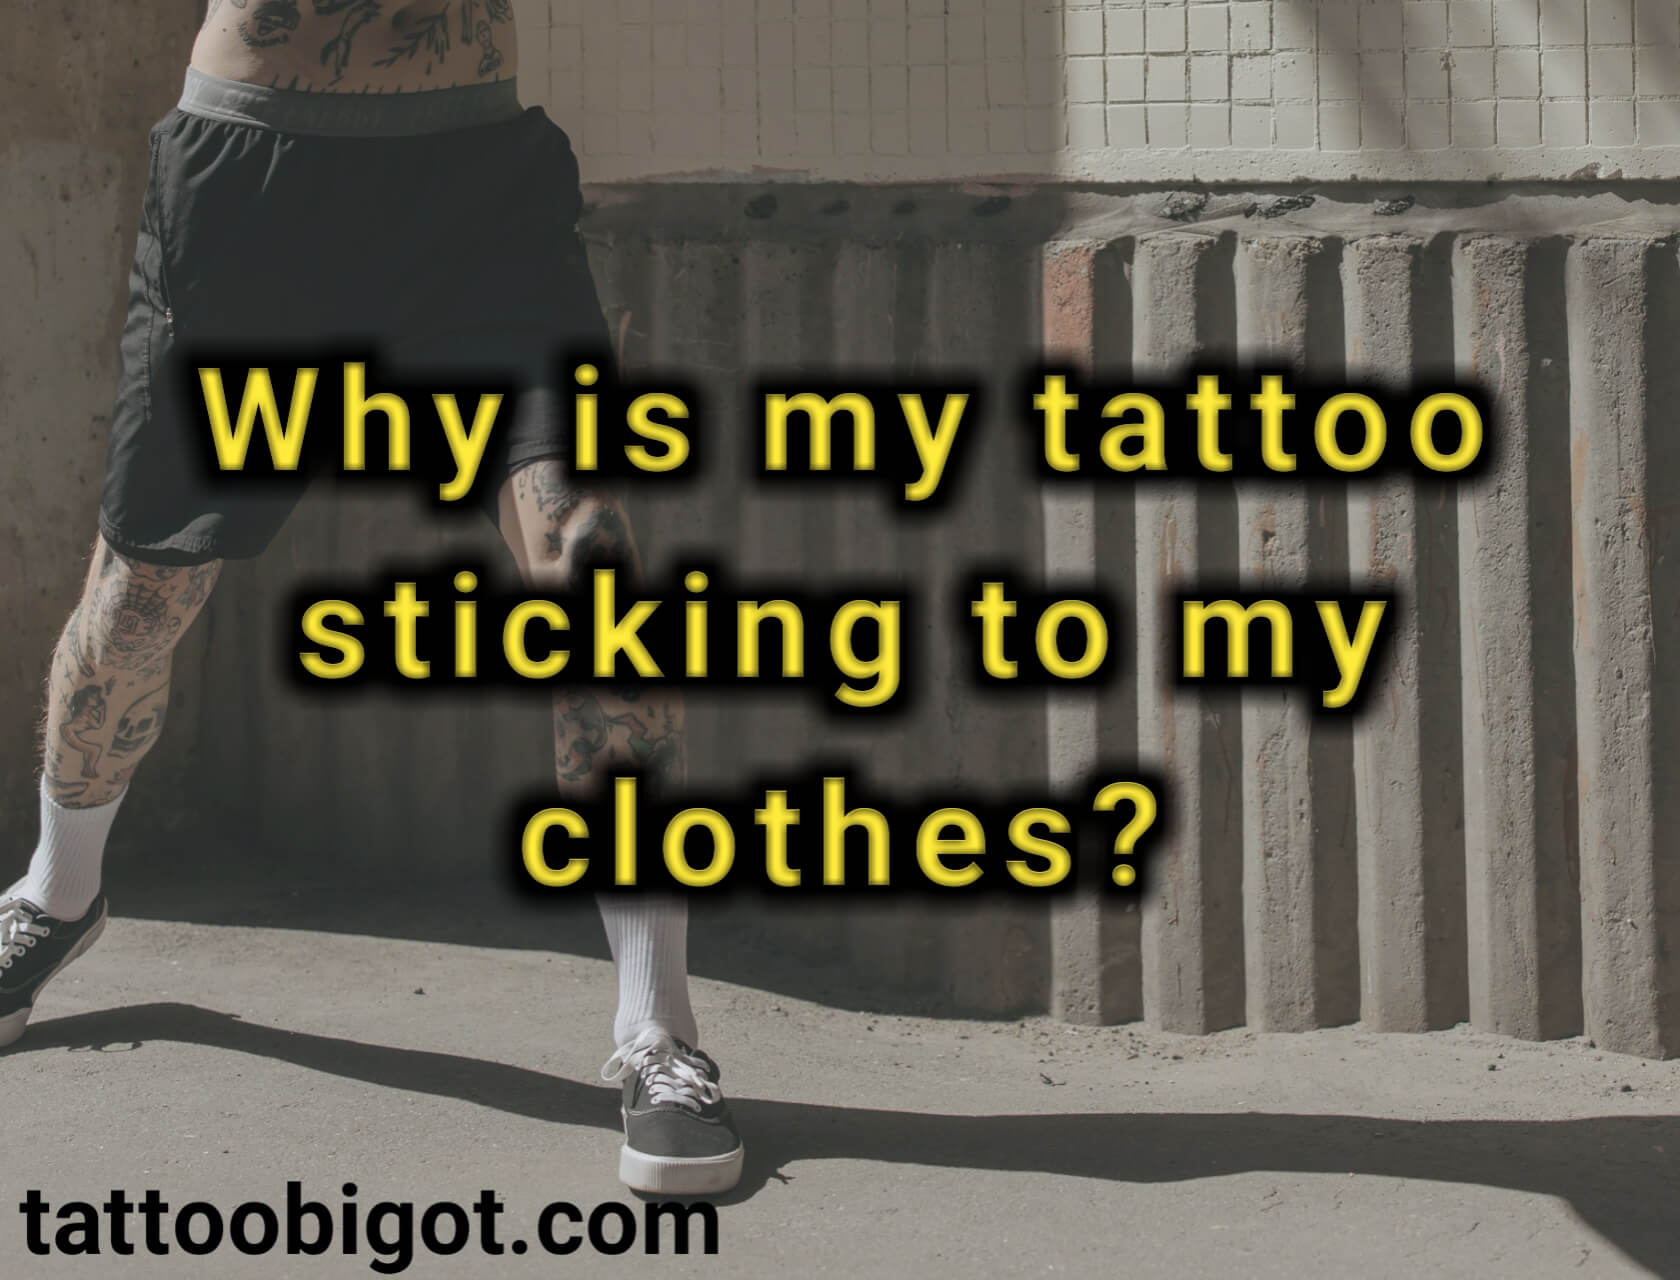 Why is my tattoo sticking to my clothes